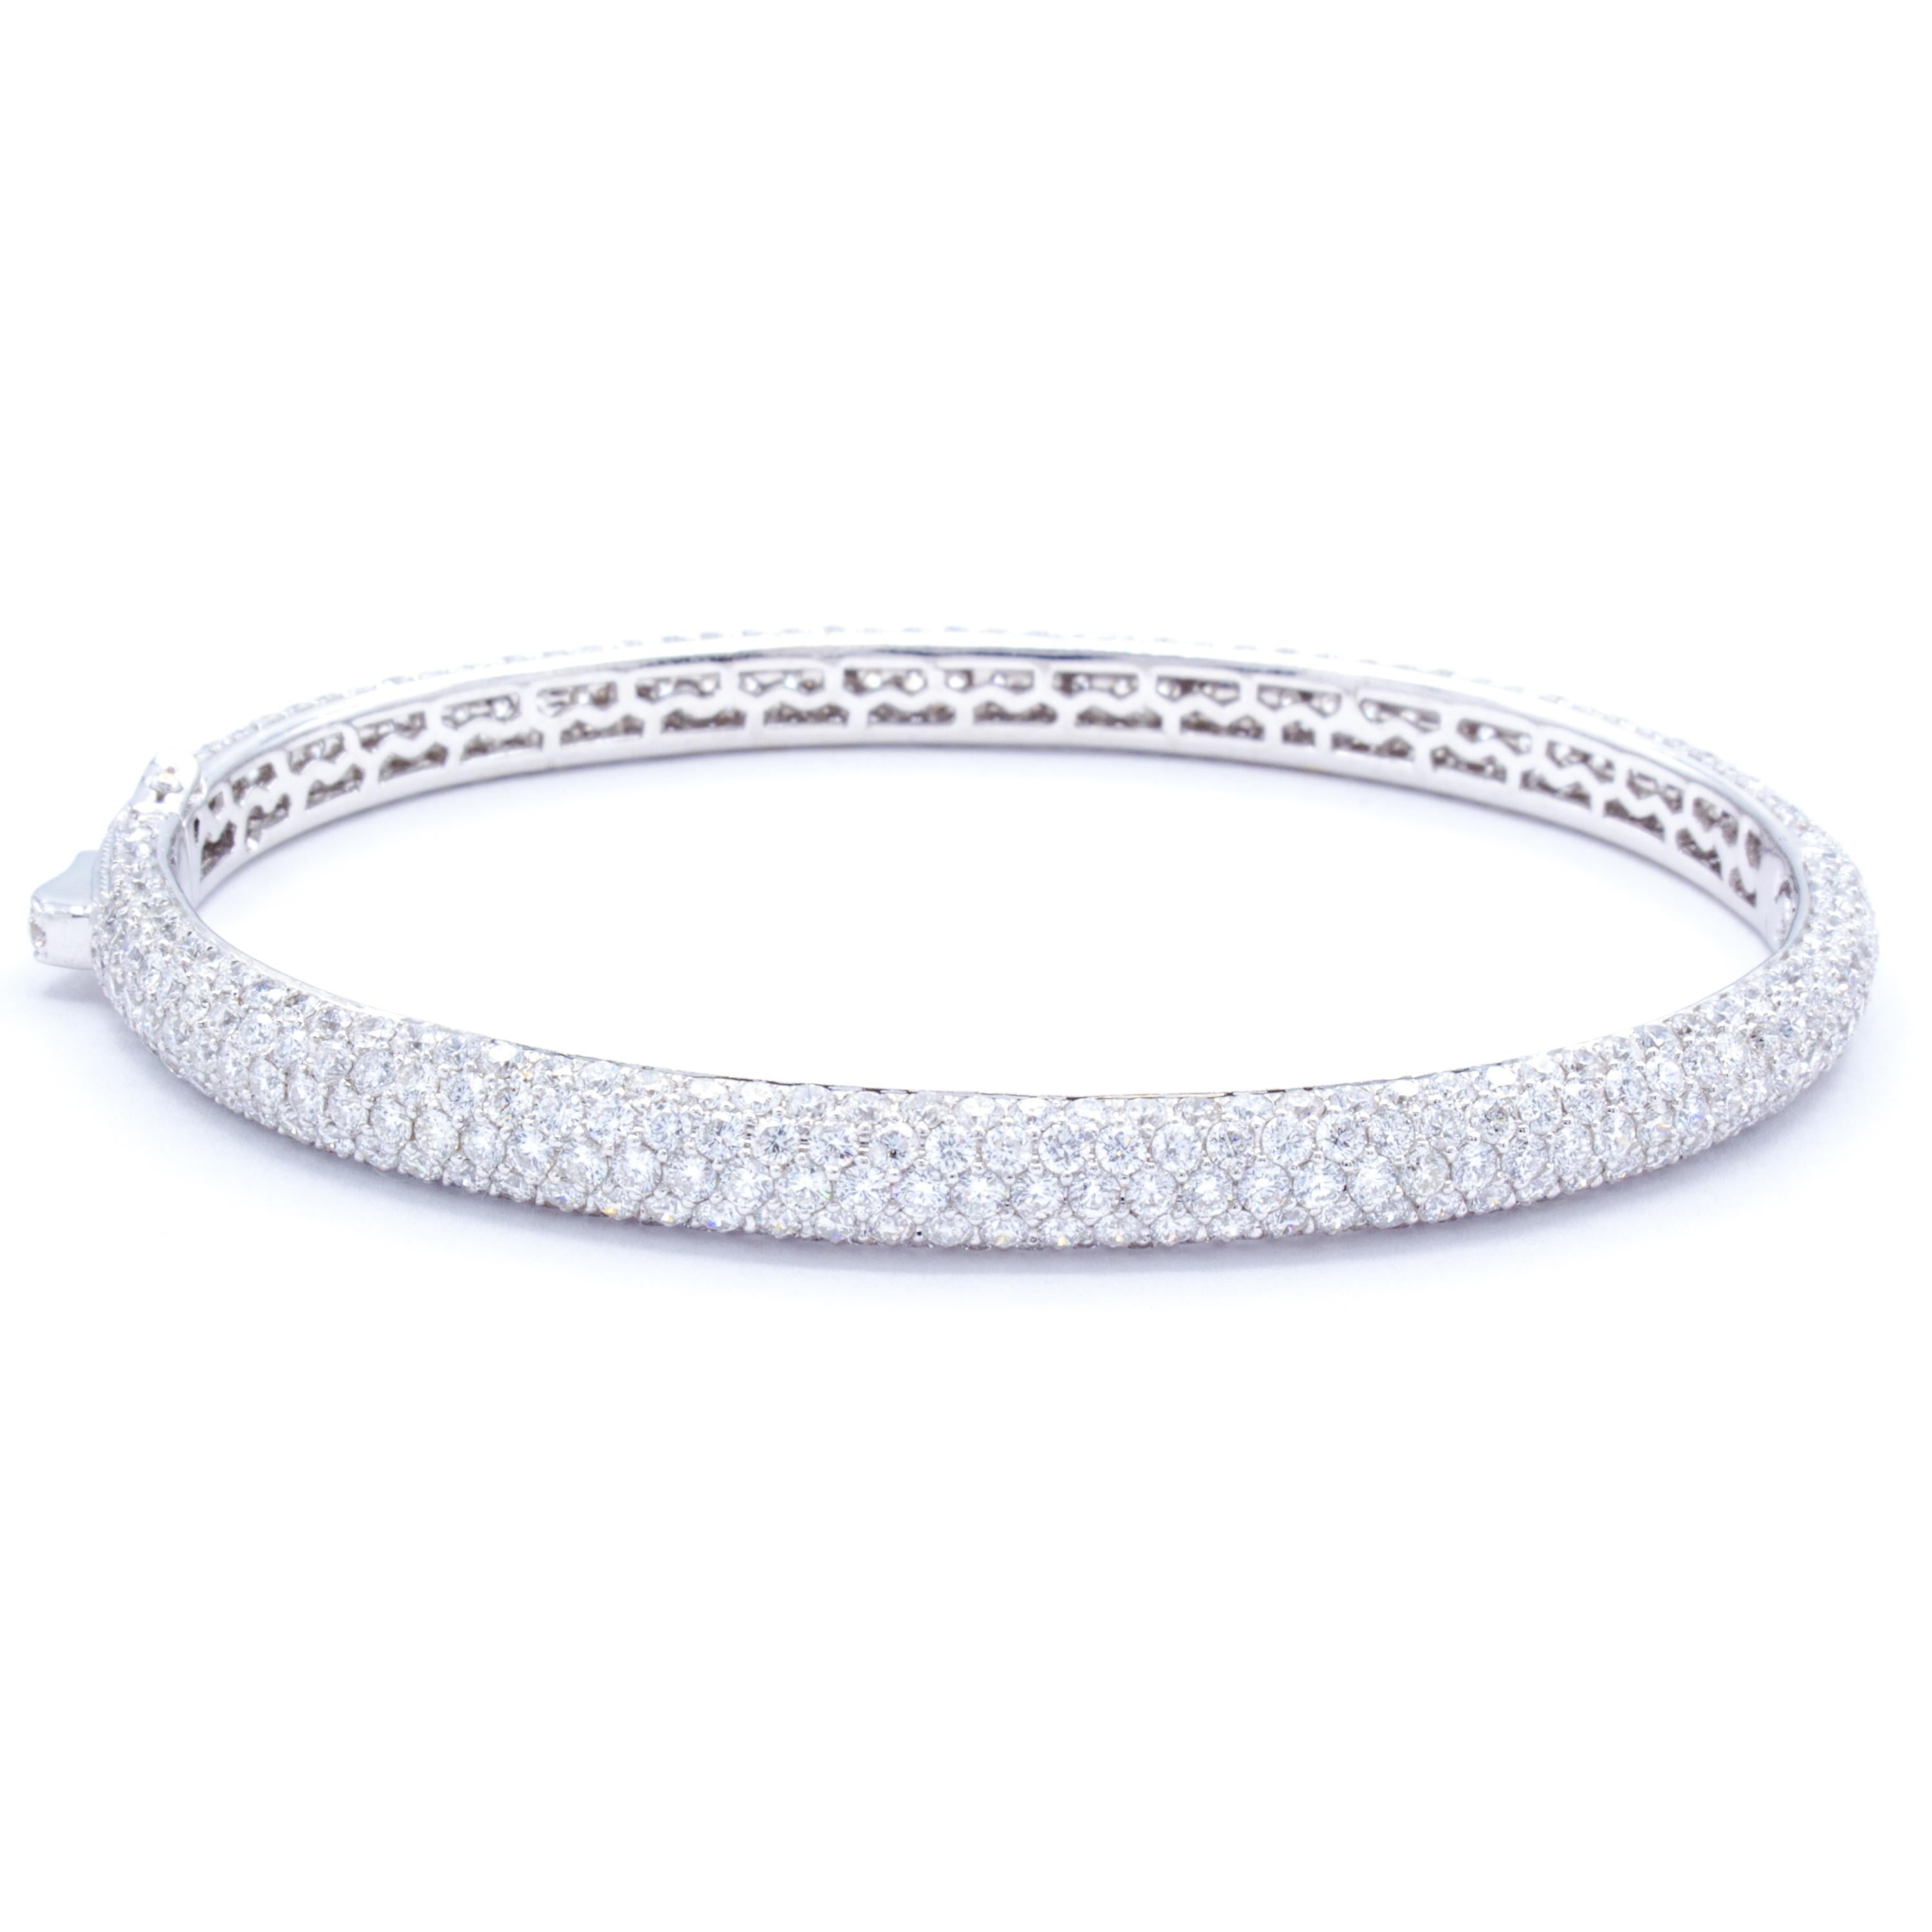 This gorgeous bangle bracelet forms a band of 18Kt white gold upon which are set over 500 round brilliant diamonds in a fiery display of color and light. This nearly overwhelming design enchants any viewer with over 8 carats in total spread upon the